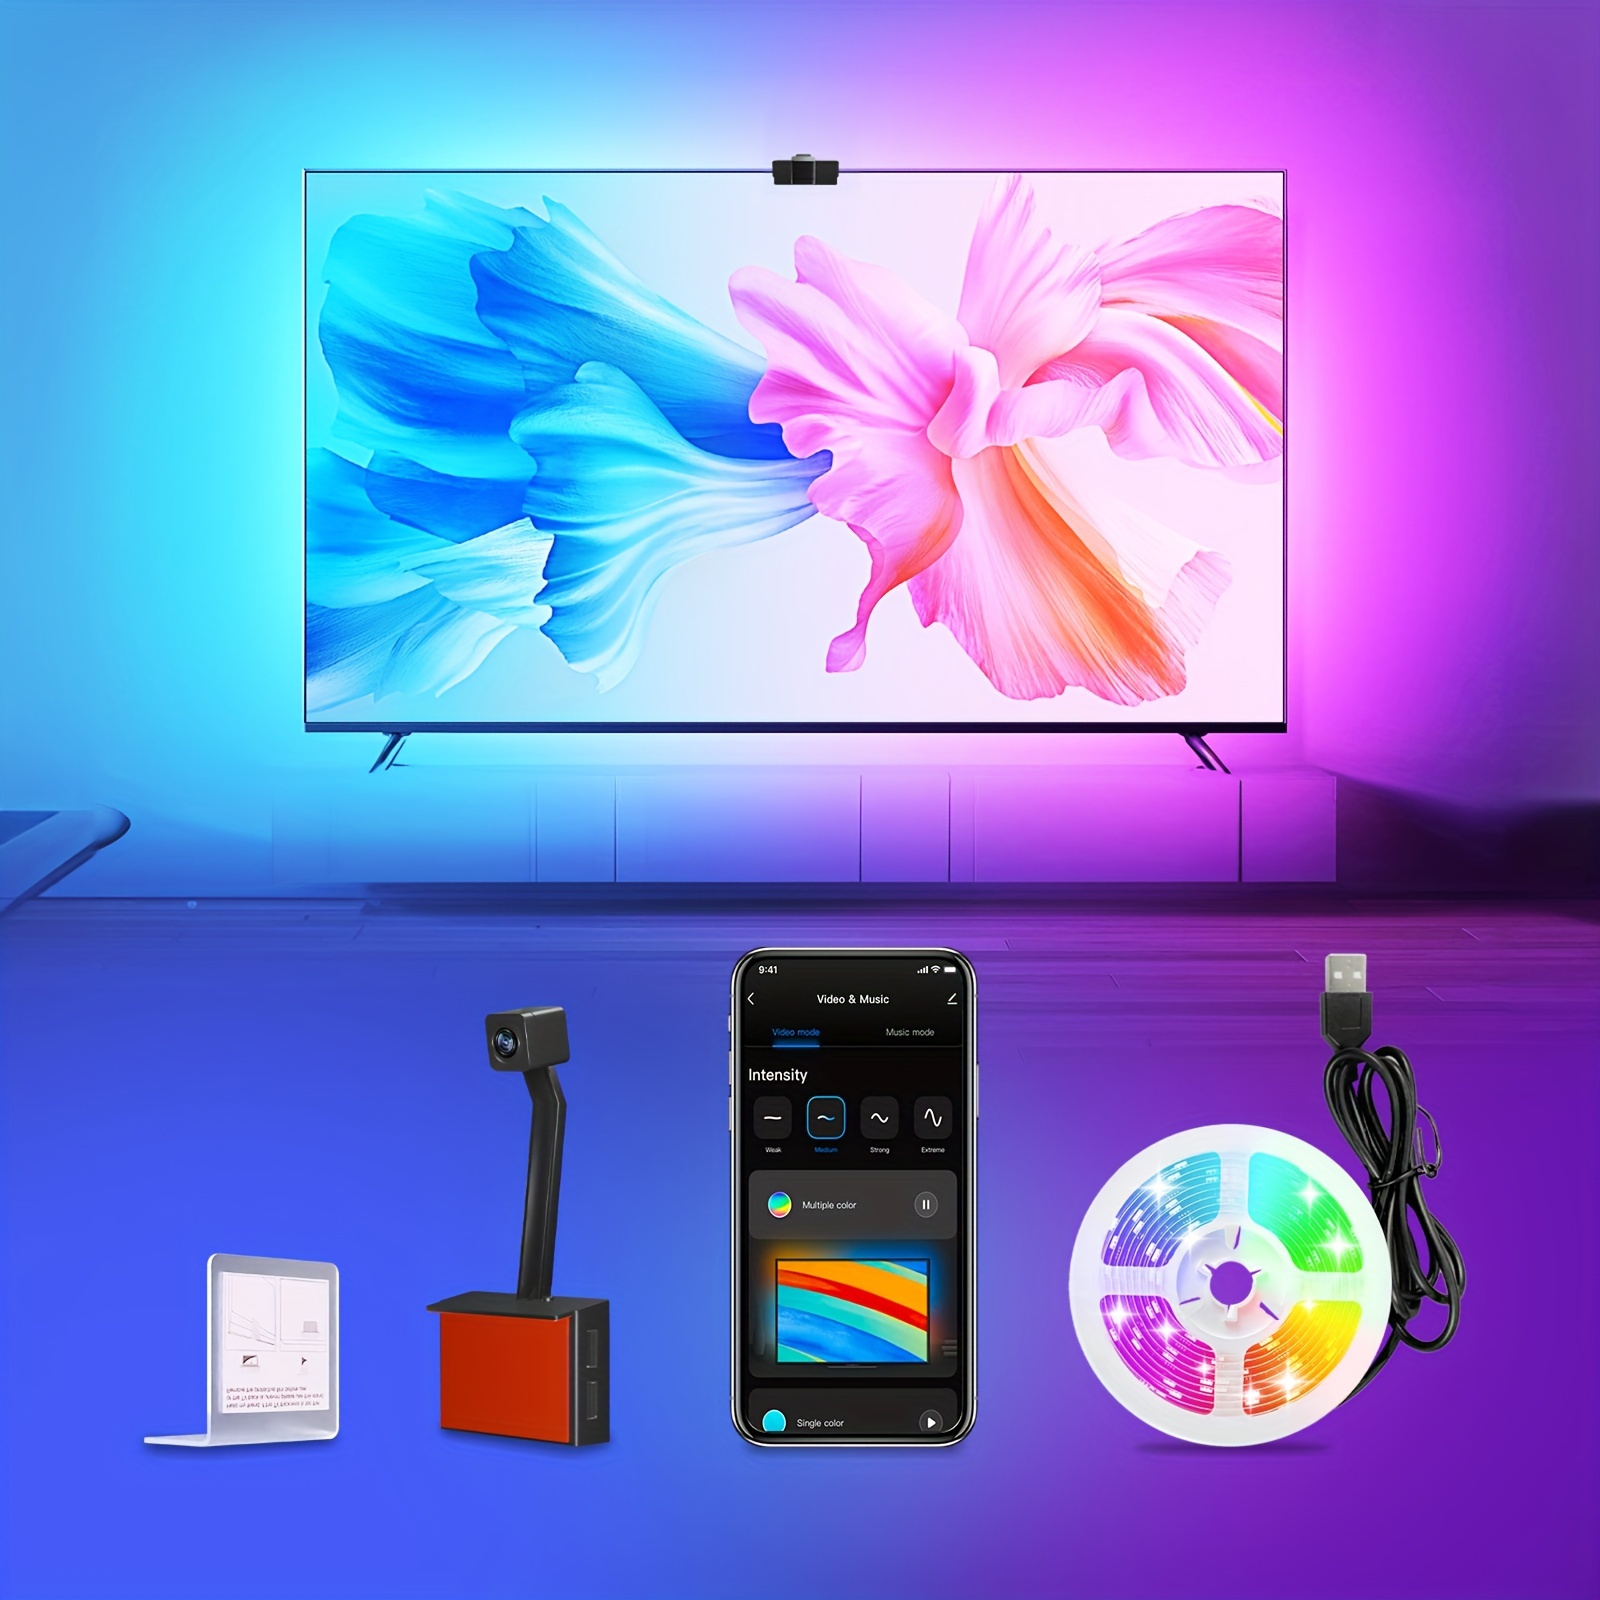 

Tv With Camera Led Backlight, Colorful Lights, Music Mode/diy Mode, Split Color Control, Easy And Quick Installation, Tv Led Light Smart Tv Led Backlight, 55-65 Inch Tv, Music Sync, App Control